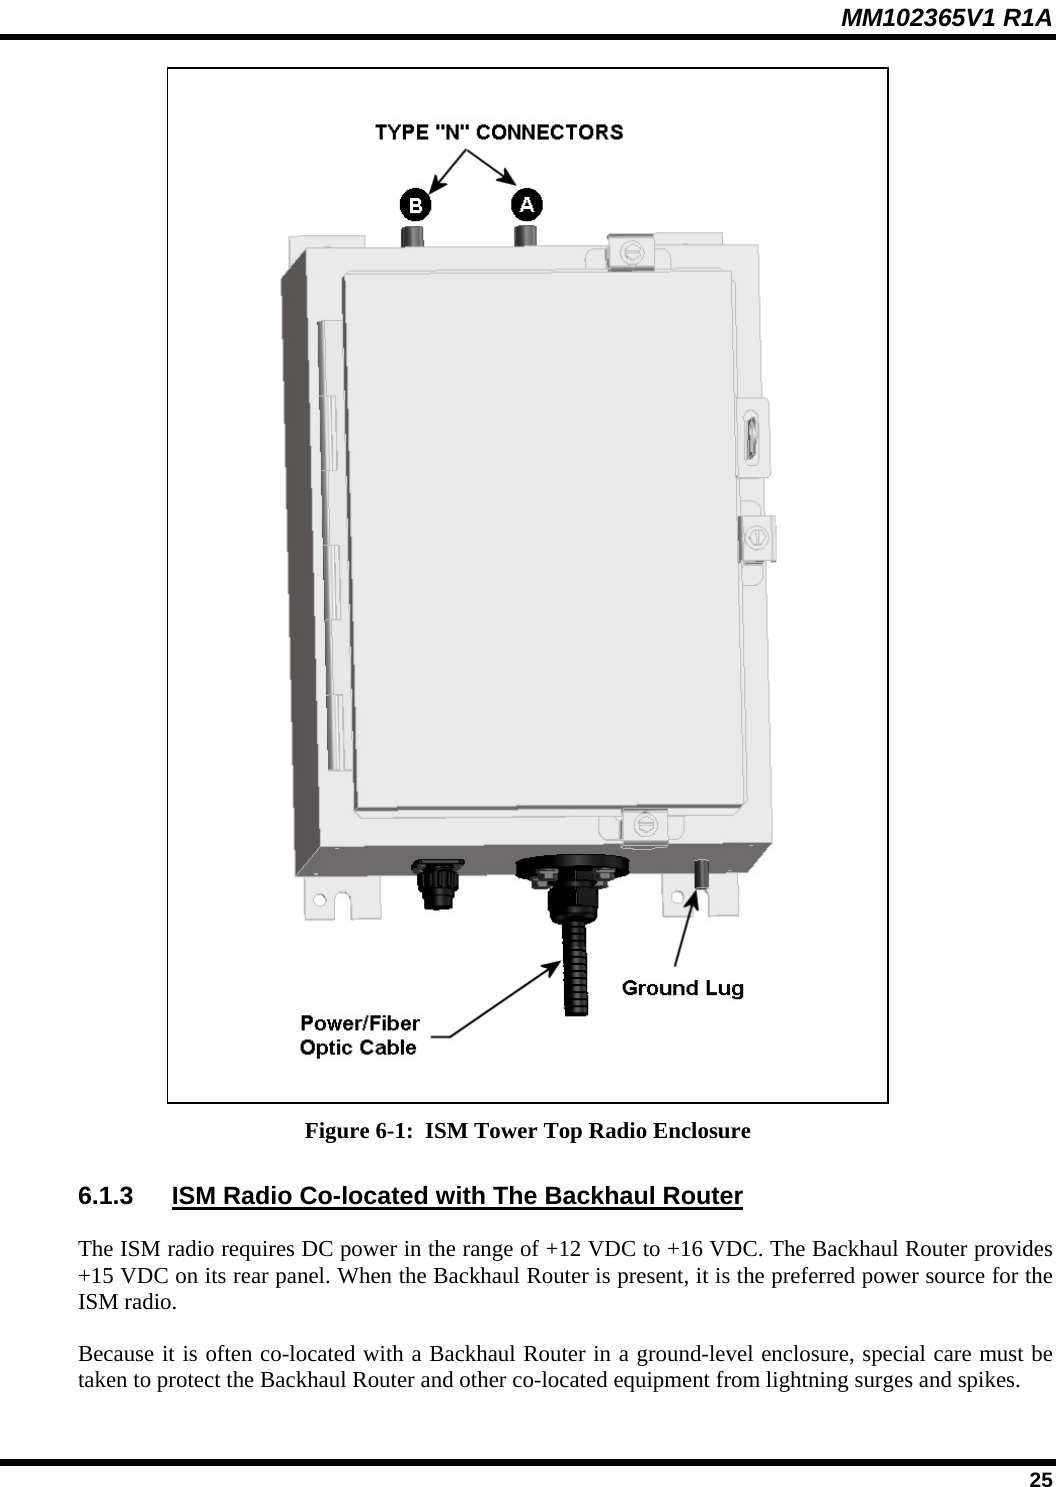 MM102365V1 R1A  Figure 6-1:  ISM Tower Top Radio Enclosure 6.1.3  ISM Radio Co-located with The Backhaul Router The ISM radio requires DC power in the range of +12 VDC to +16 VDC. The Backhaul Router provides +15 VDC on its rear panel. When the Backhaul Router is present, it is the preferred power source for the ISM radio. Because it is often co-located with a Backhaul Router in a ground-level enclosure, special care must be taken to protect the Backhaul Router and other co-located equipment from lightning surges and spikes.  25 